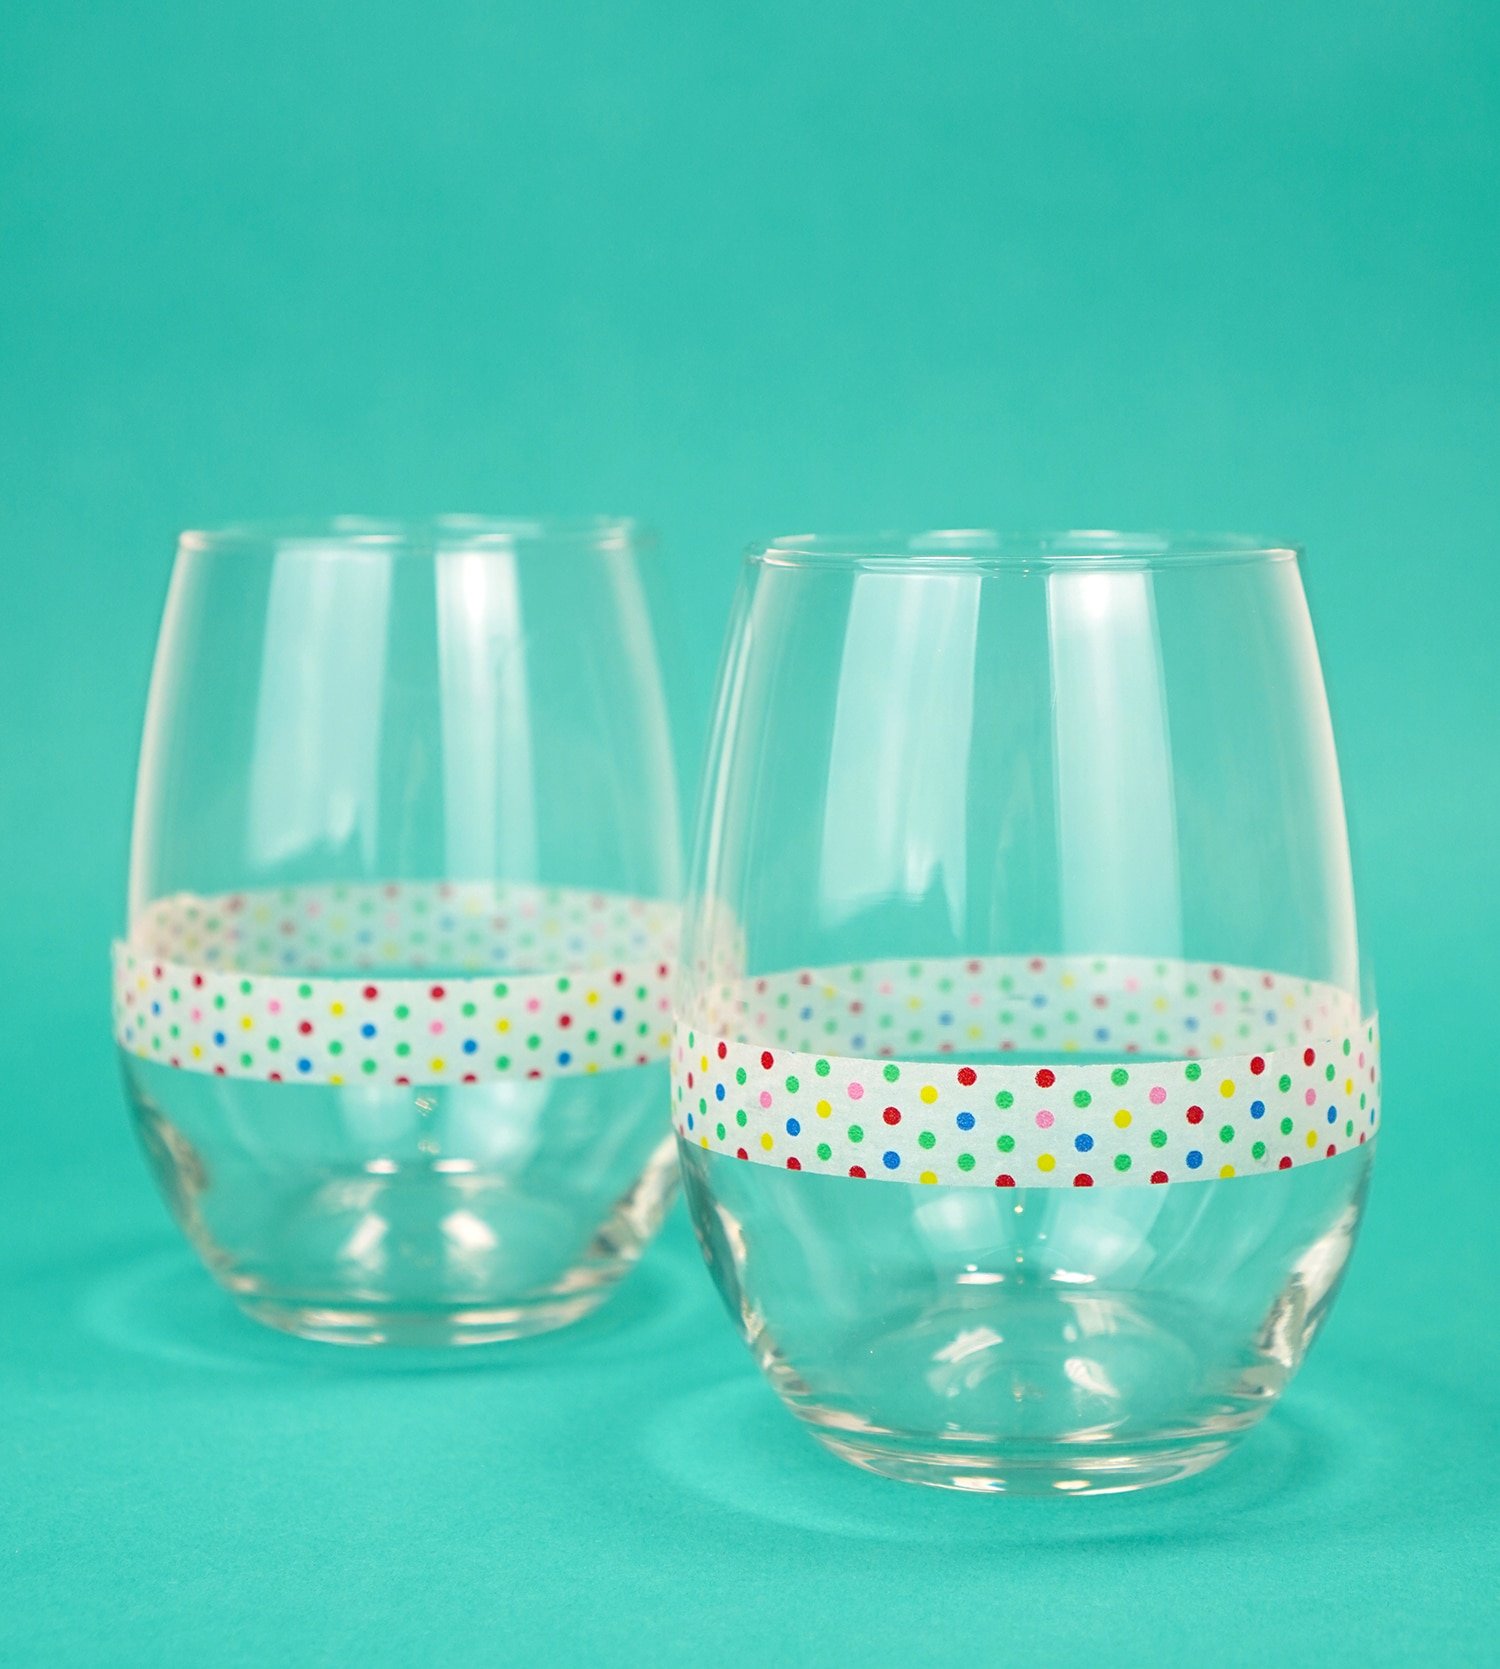 Two stemless wine glasses on teal background with a band of polka dot washi tape around each glass